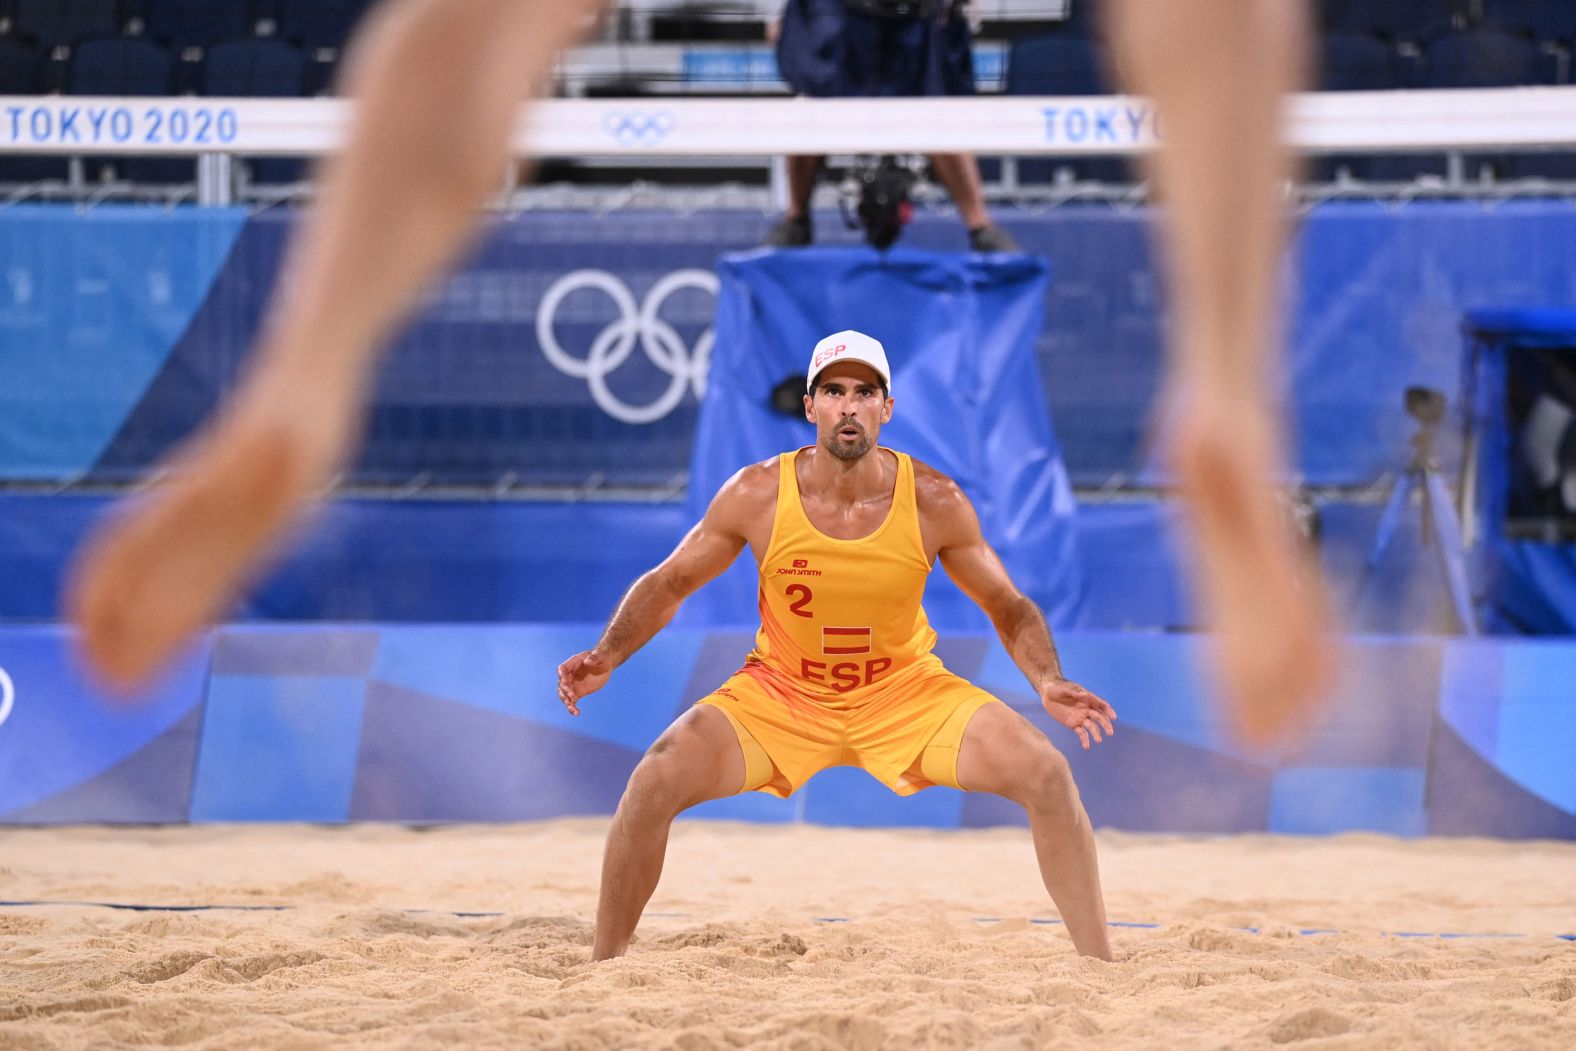 Spain's Adrian Gavira Collado waits for a serve during a beach volleyball match on July 26.